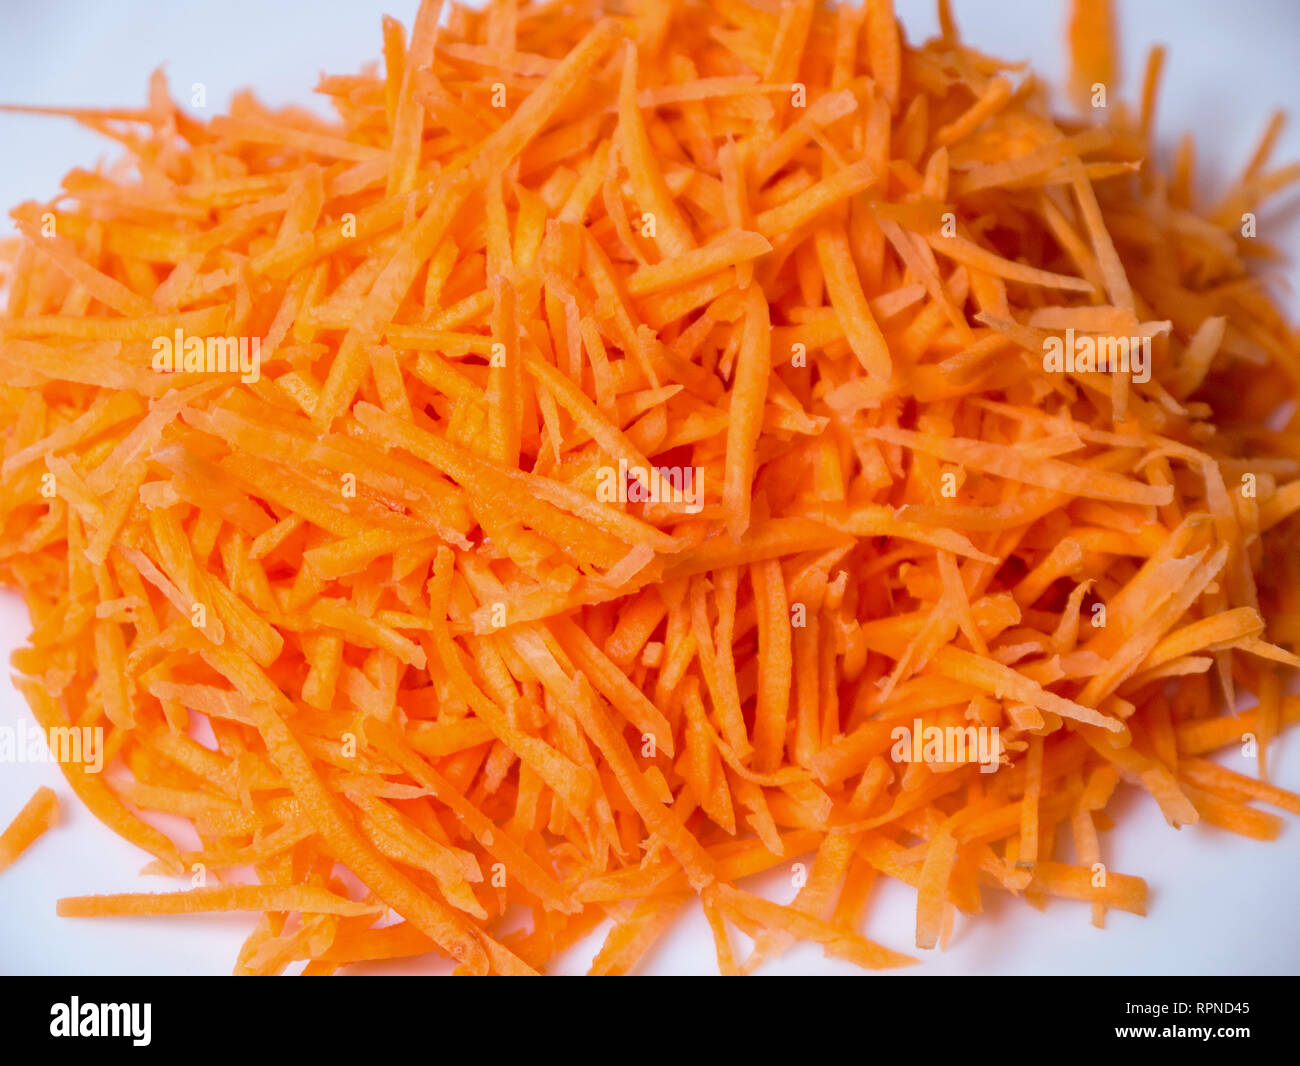 fresh winter carrot cut in julienne on a white background Stock Photo